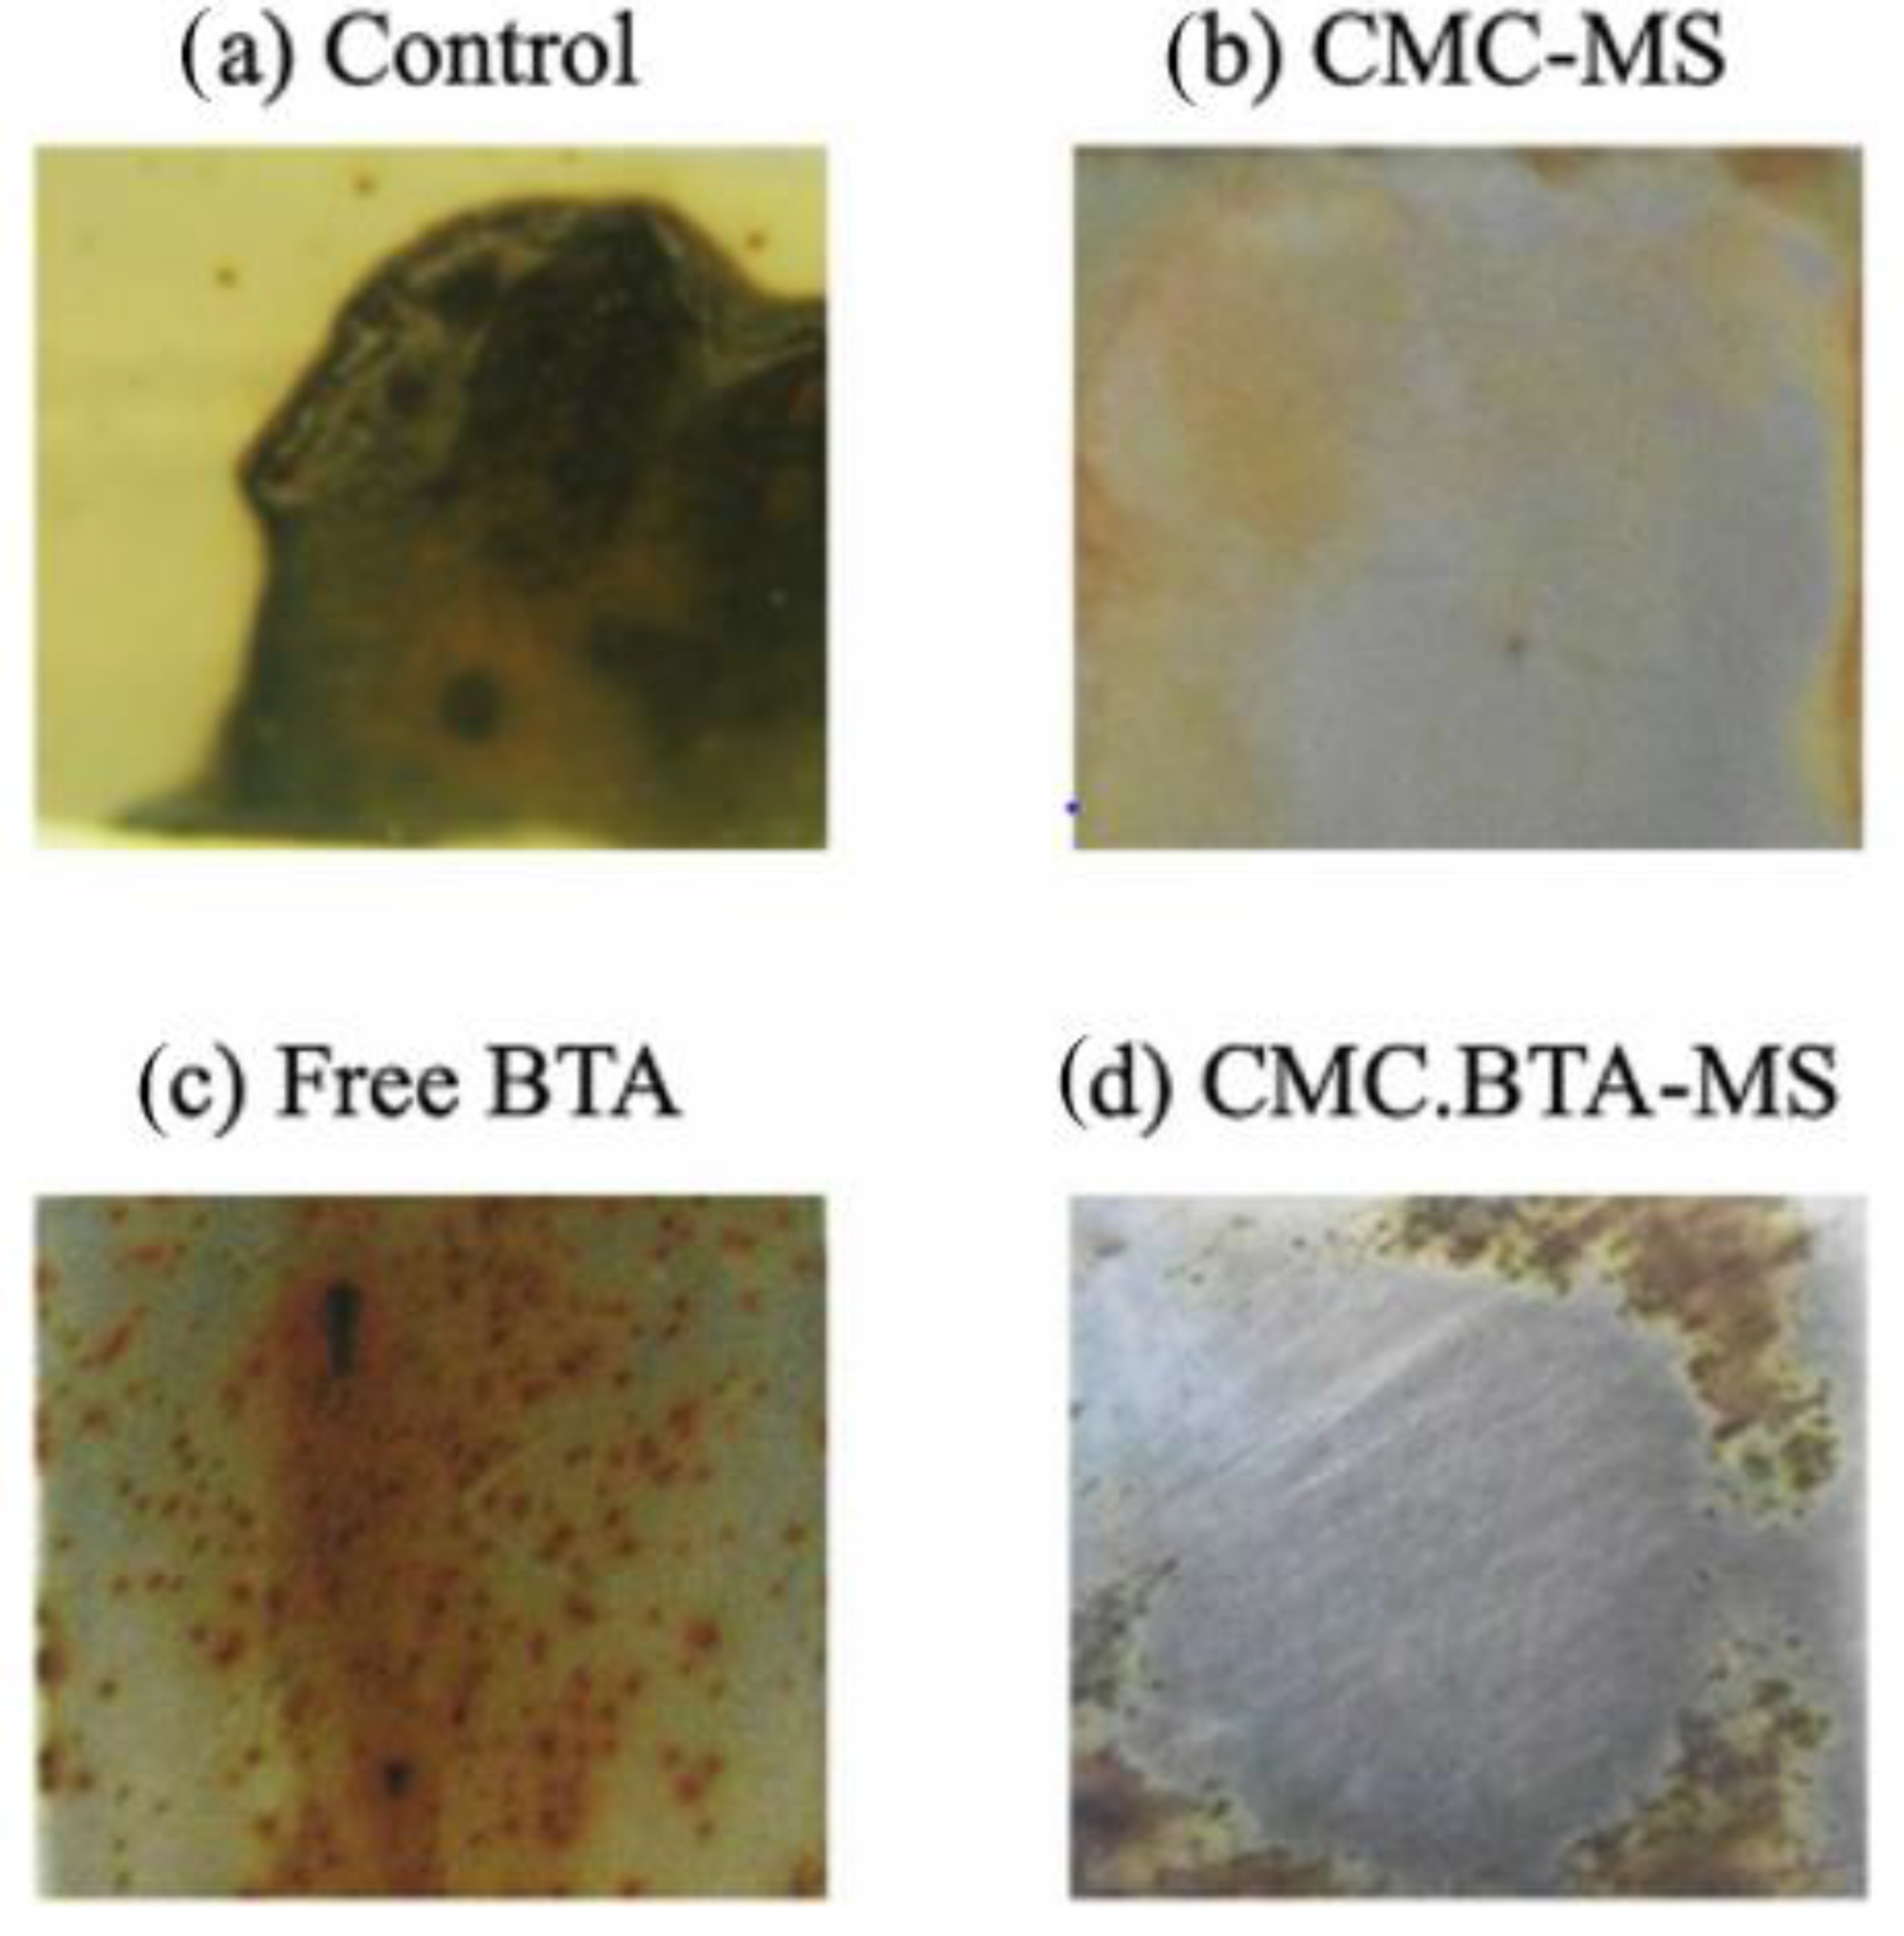 Photographs of carbon steel after 48 h of dip in NaCl sol. (a) Control material (b) CMC laden carbon steel (c) BTA free sample (d) CMC encapsulated BTA-MS [44].